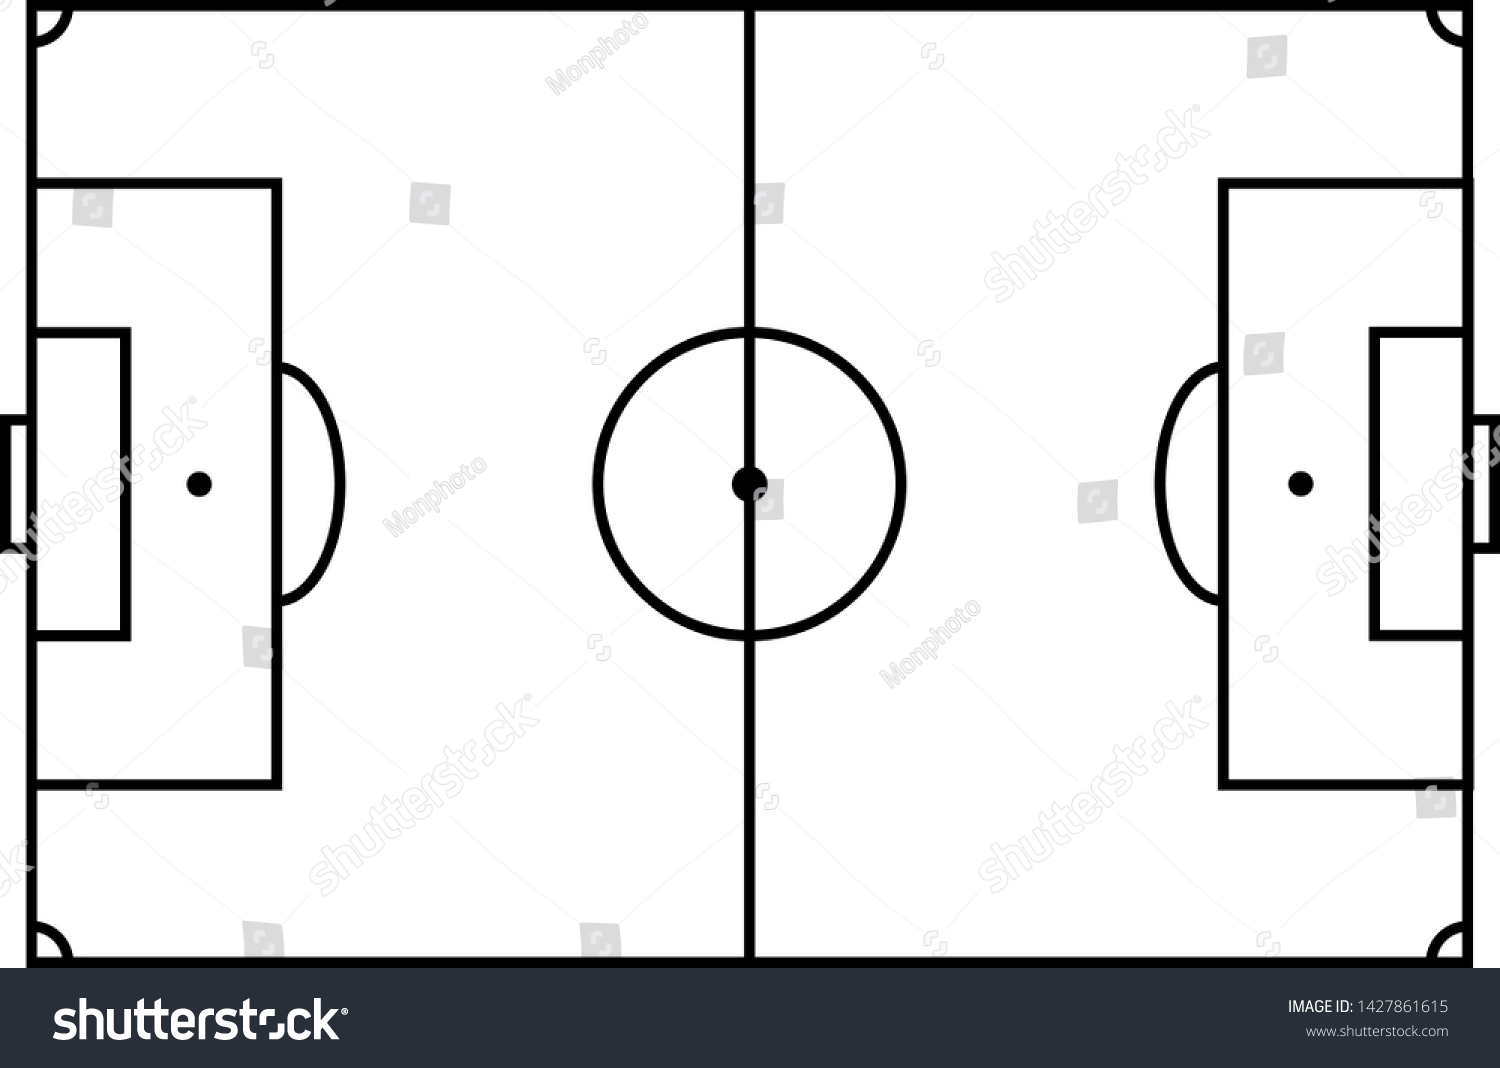 Outline of a soccer field. - Royalty Free Stock Vector 1427861615 ...